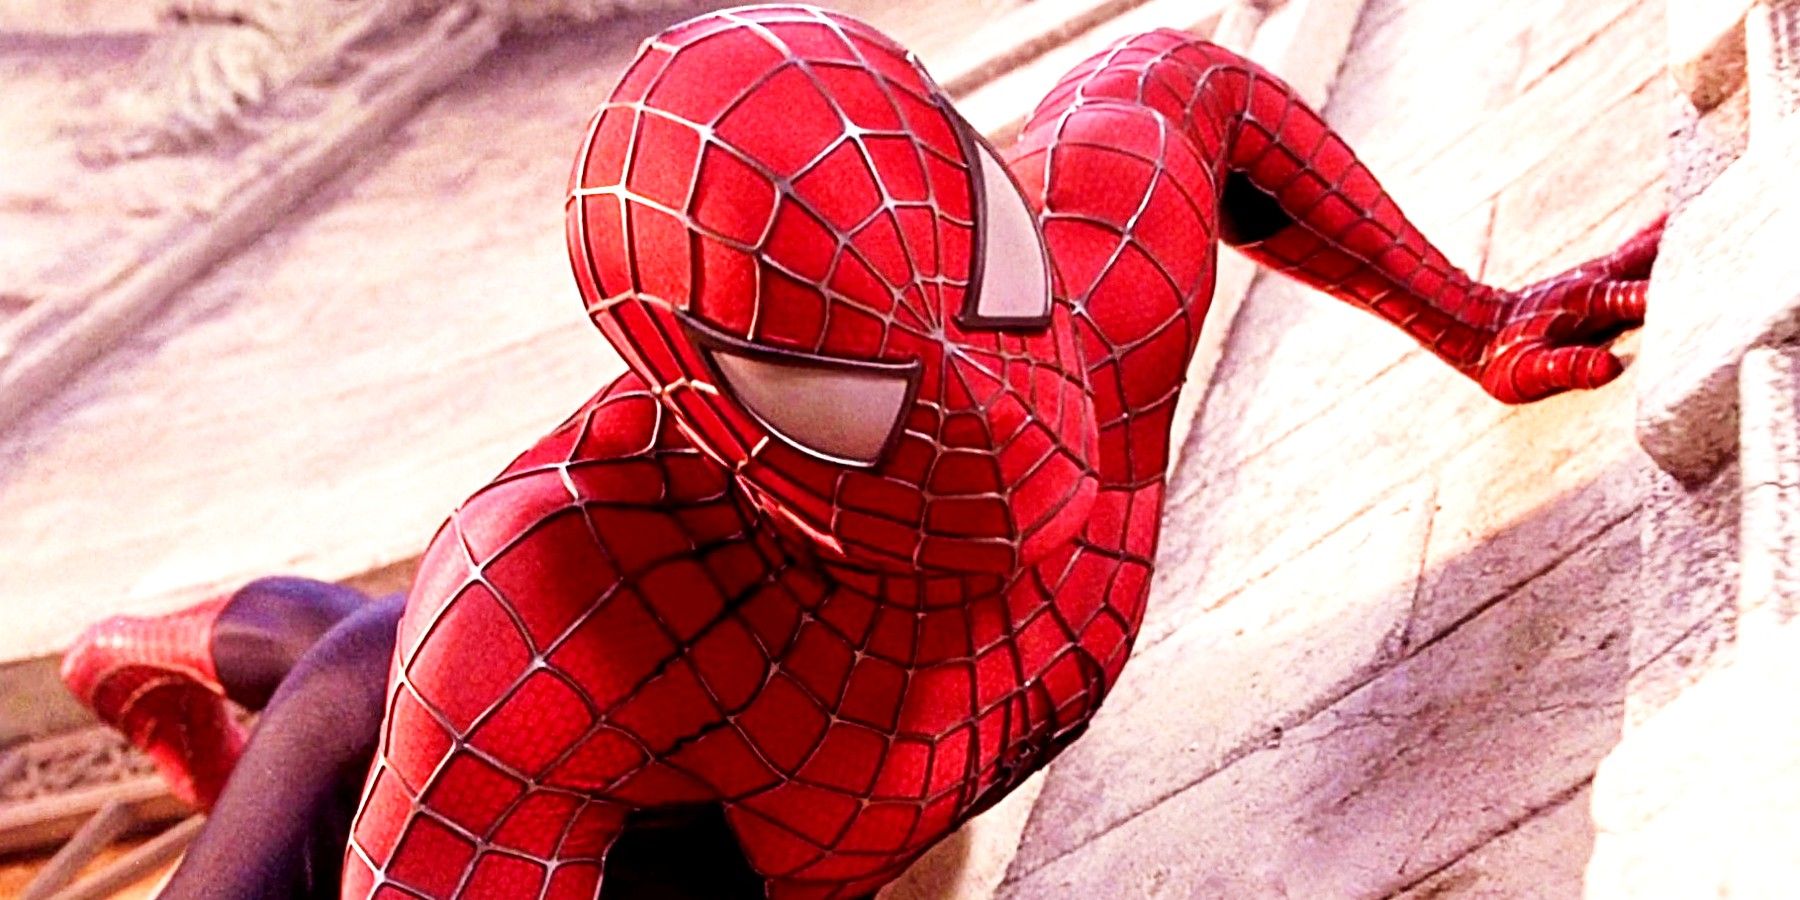 10 Harsh Realities Of Tobey Maguire's Spider-Man Character